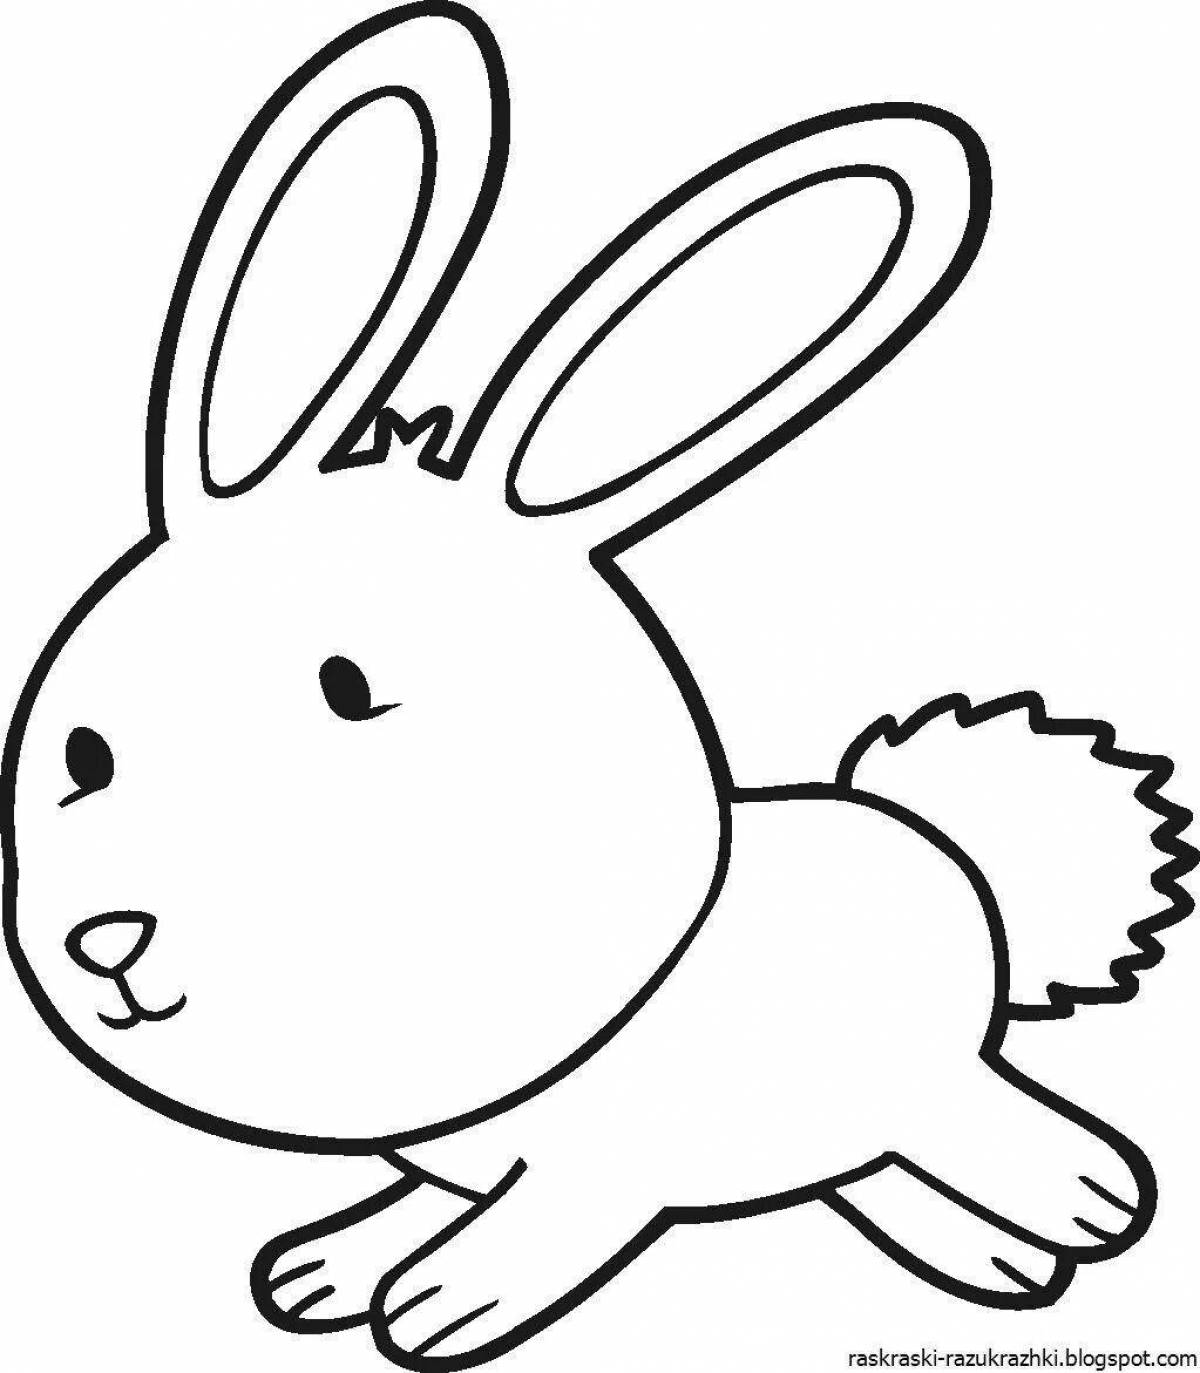 Snuggly coloring page rabbit bunny